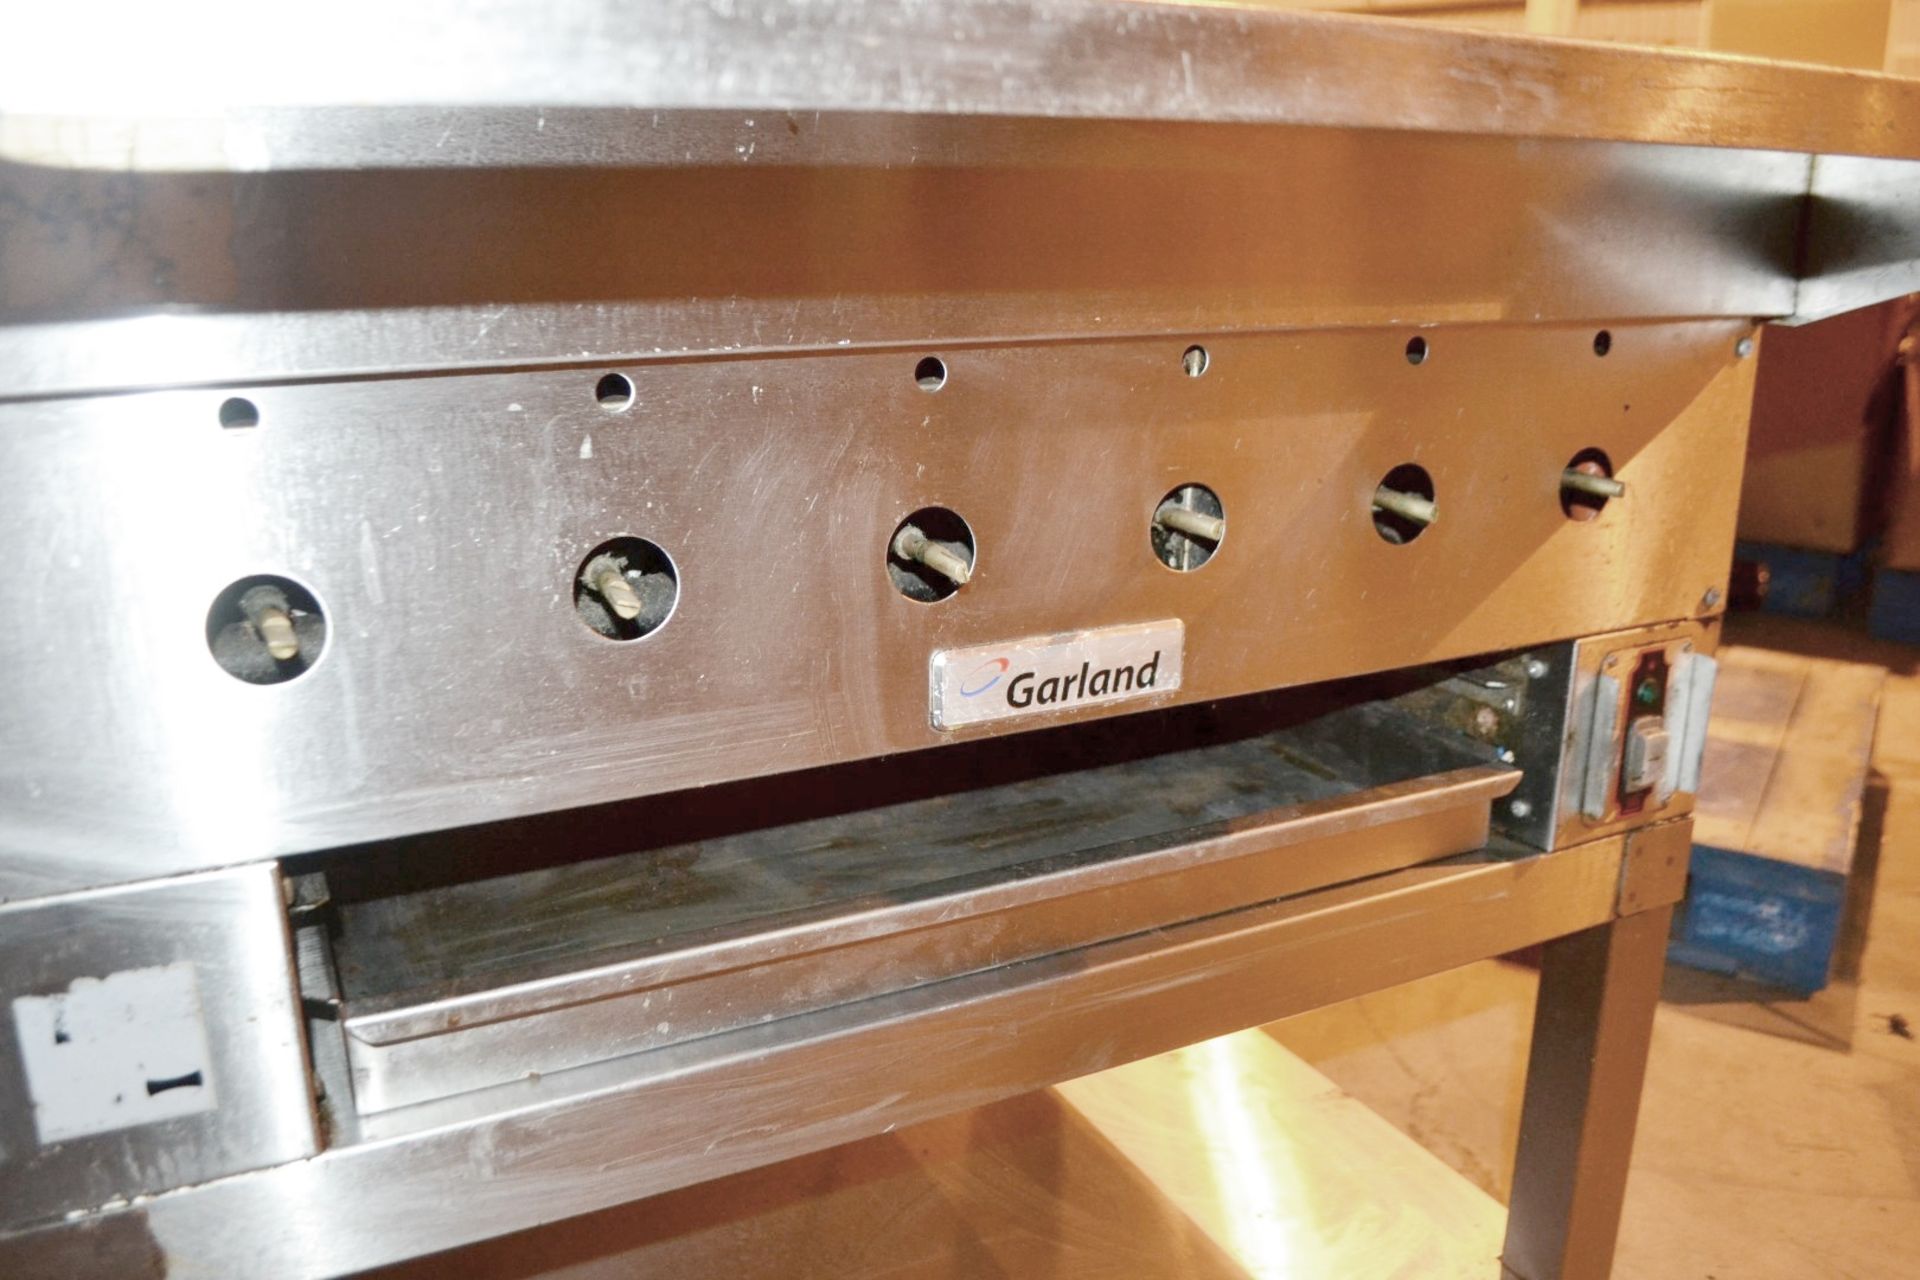 1 x Stainless Steel GARLAND Commercial Griddle With Stand - CL350 - Ref212 - Location: Altrincham - Image 4 of 4